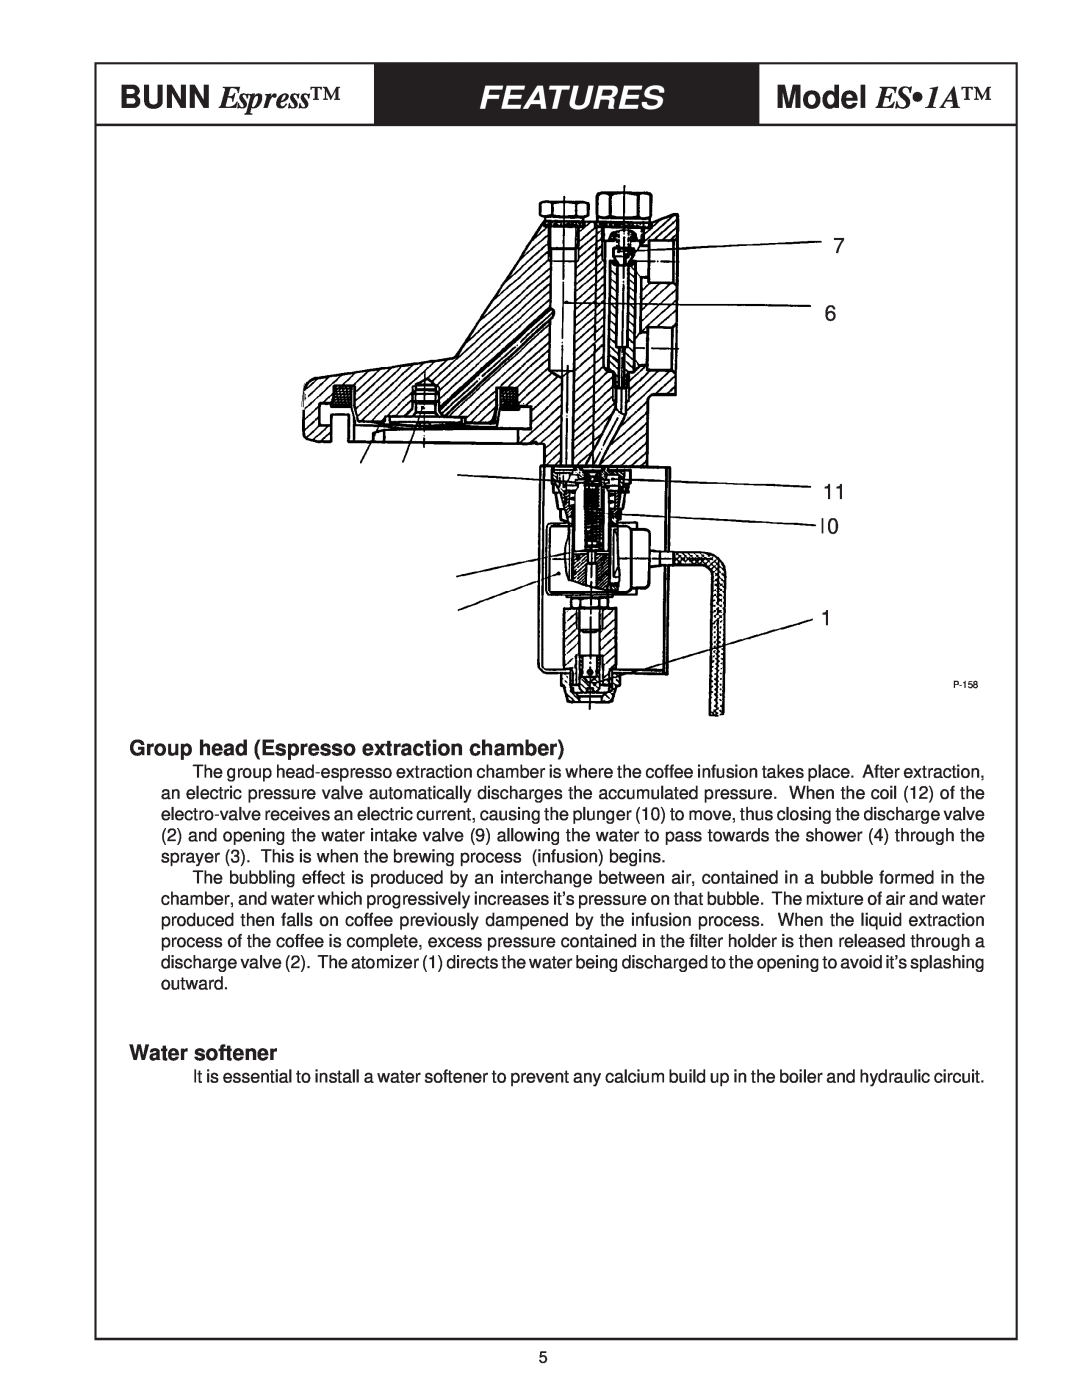 Bunn ES1A service manual BUNN Espress, Features, Model ES 1A, Group head Espresso extraction chamber, Water softener 